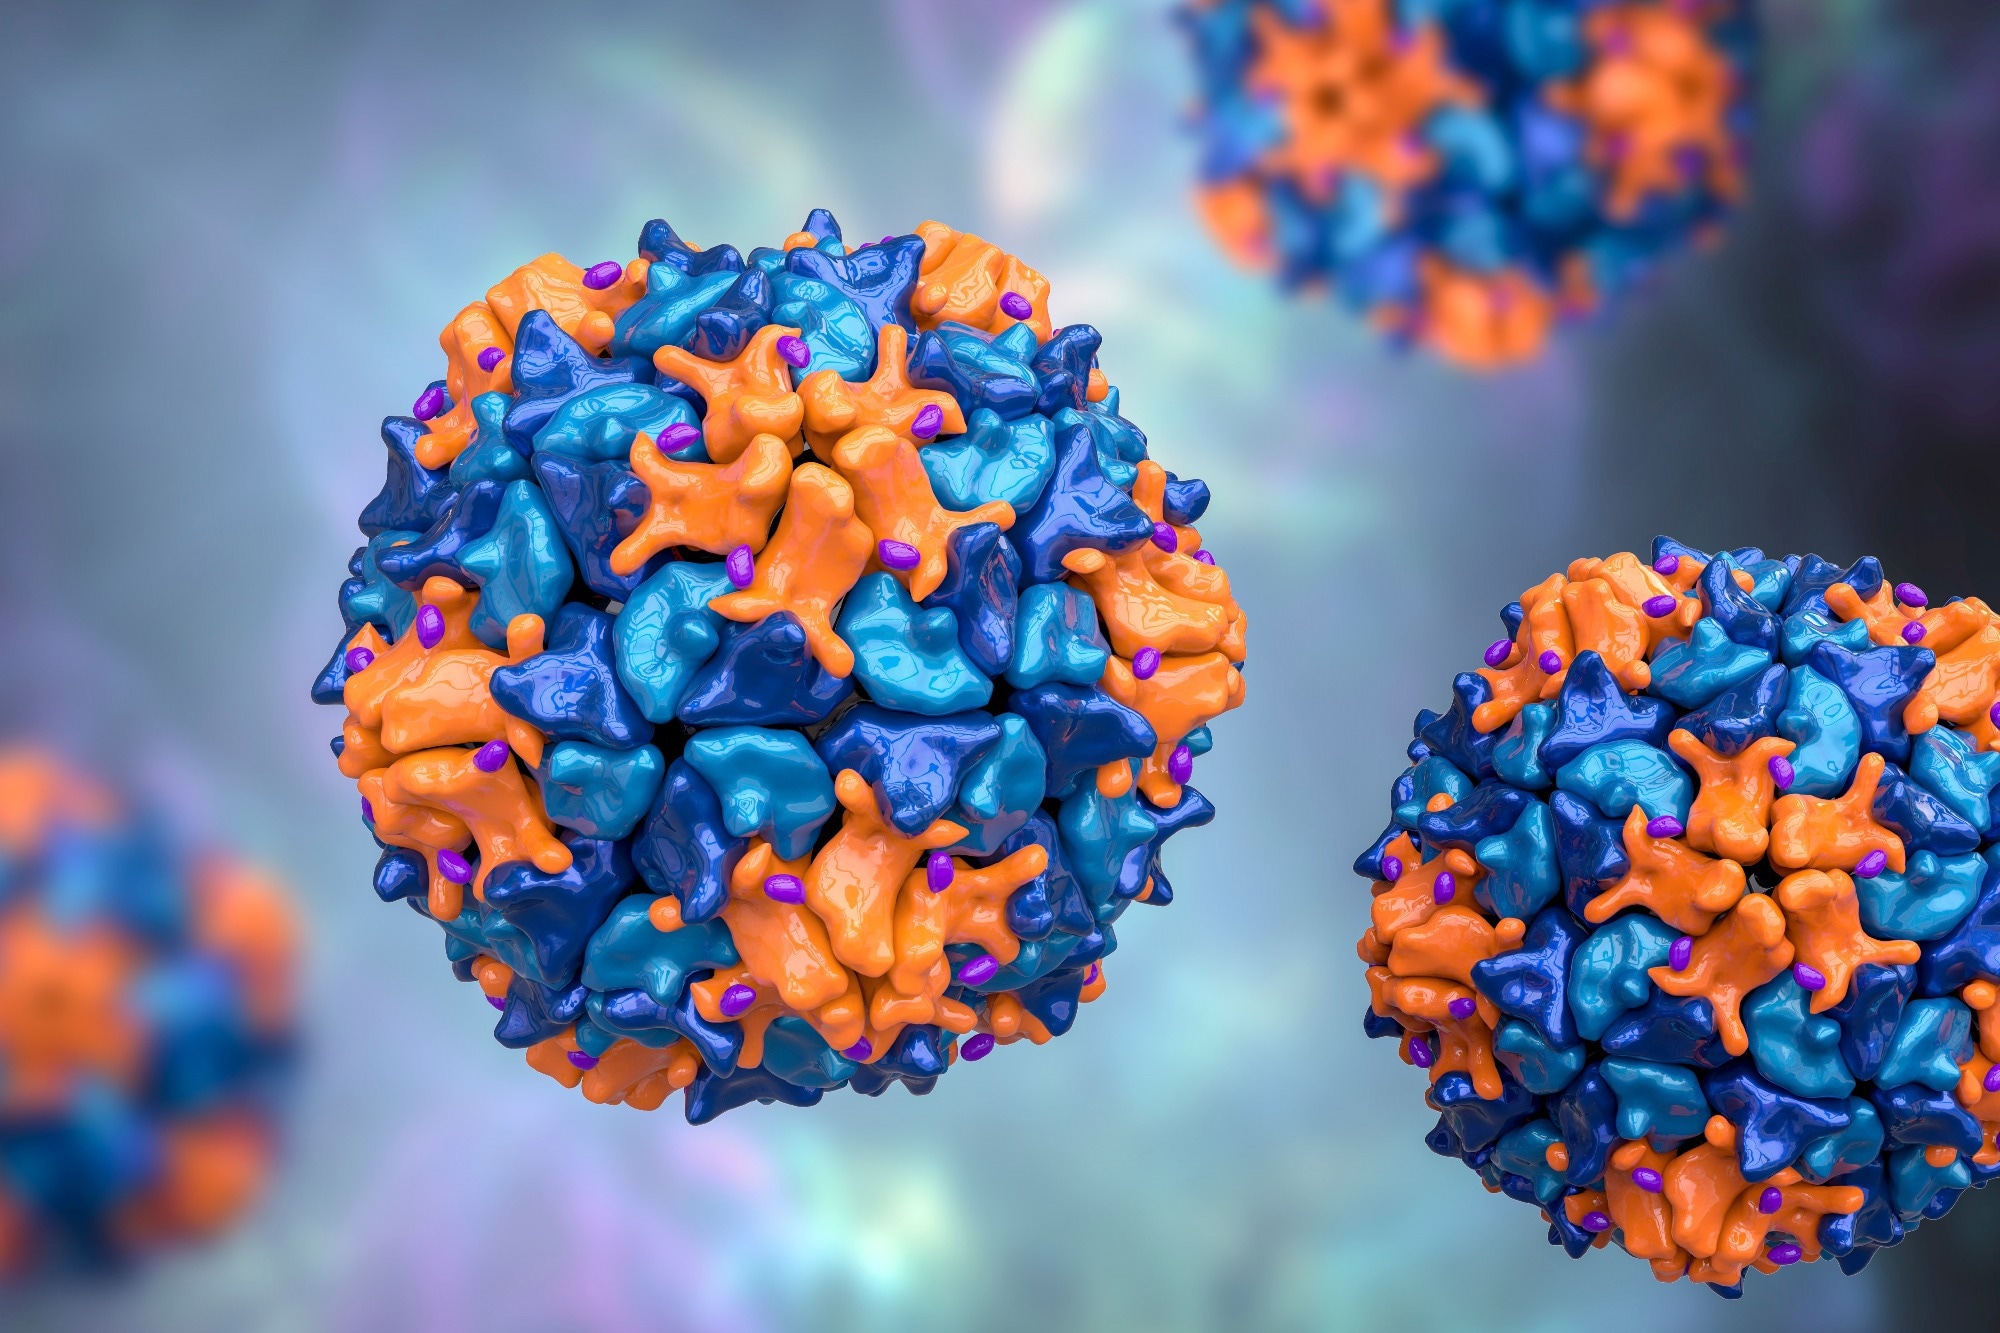 Rapid communication: emergence of genetically linked vaccine-derived poliovirus type 2 in the absence of oral polio vaccine, Jerusalem, April-July 2022. Credit: Kateryna Kon/Shutterstock